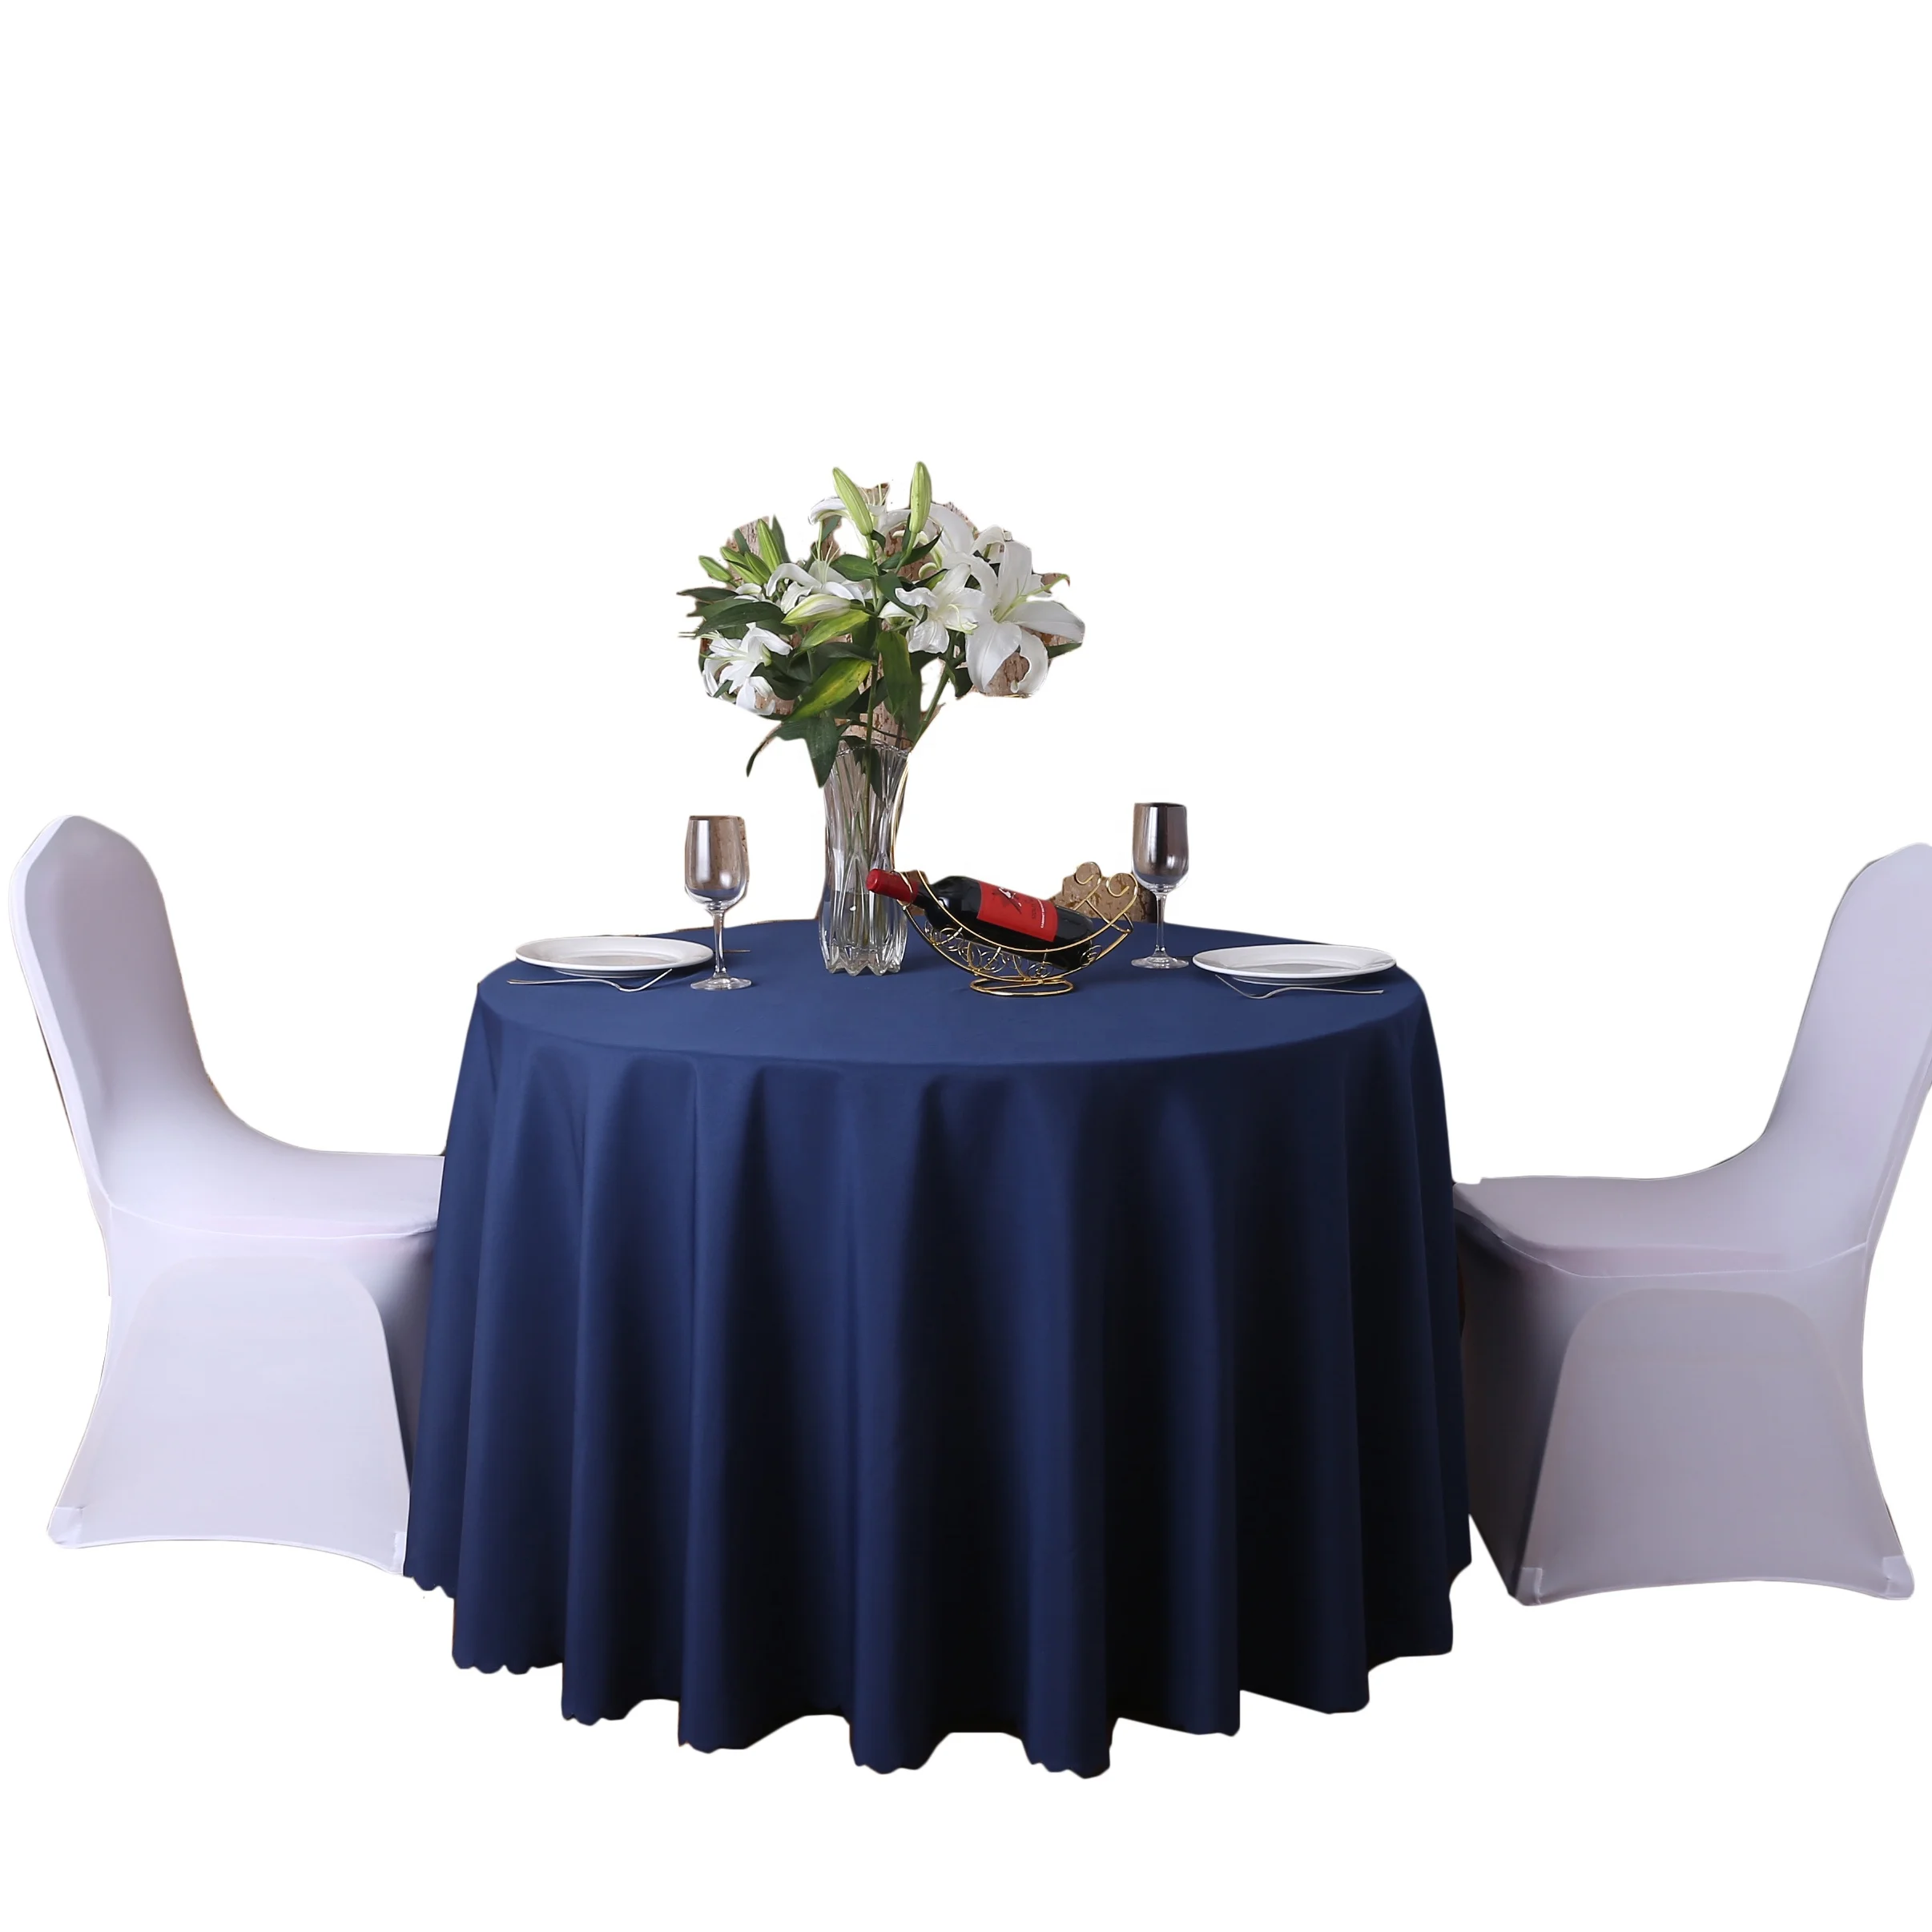 
Washable Navy Blue Polyester Fabric Table Cloth For Round Tables  (62386757508)